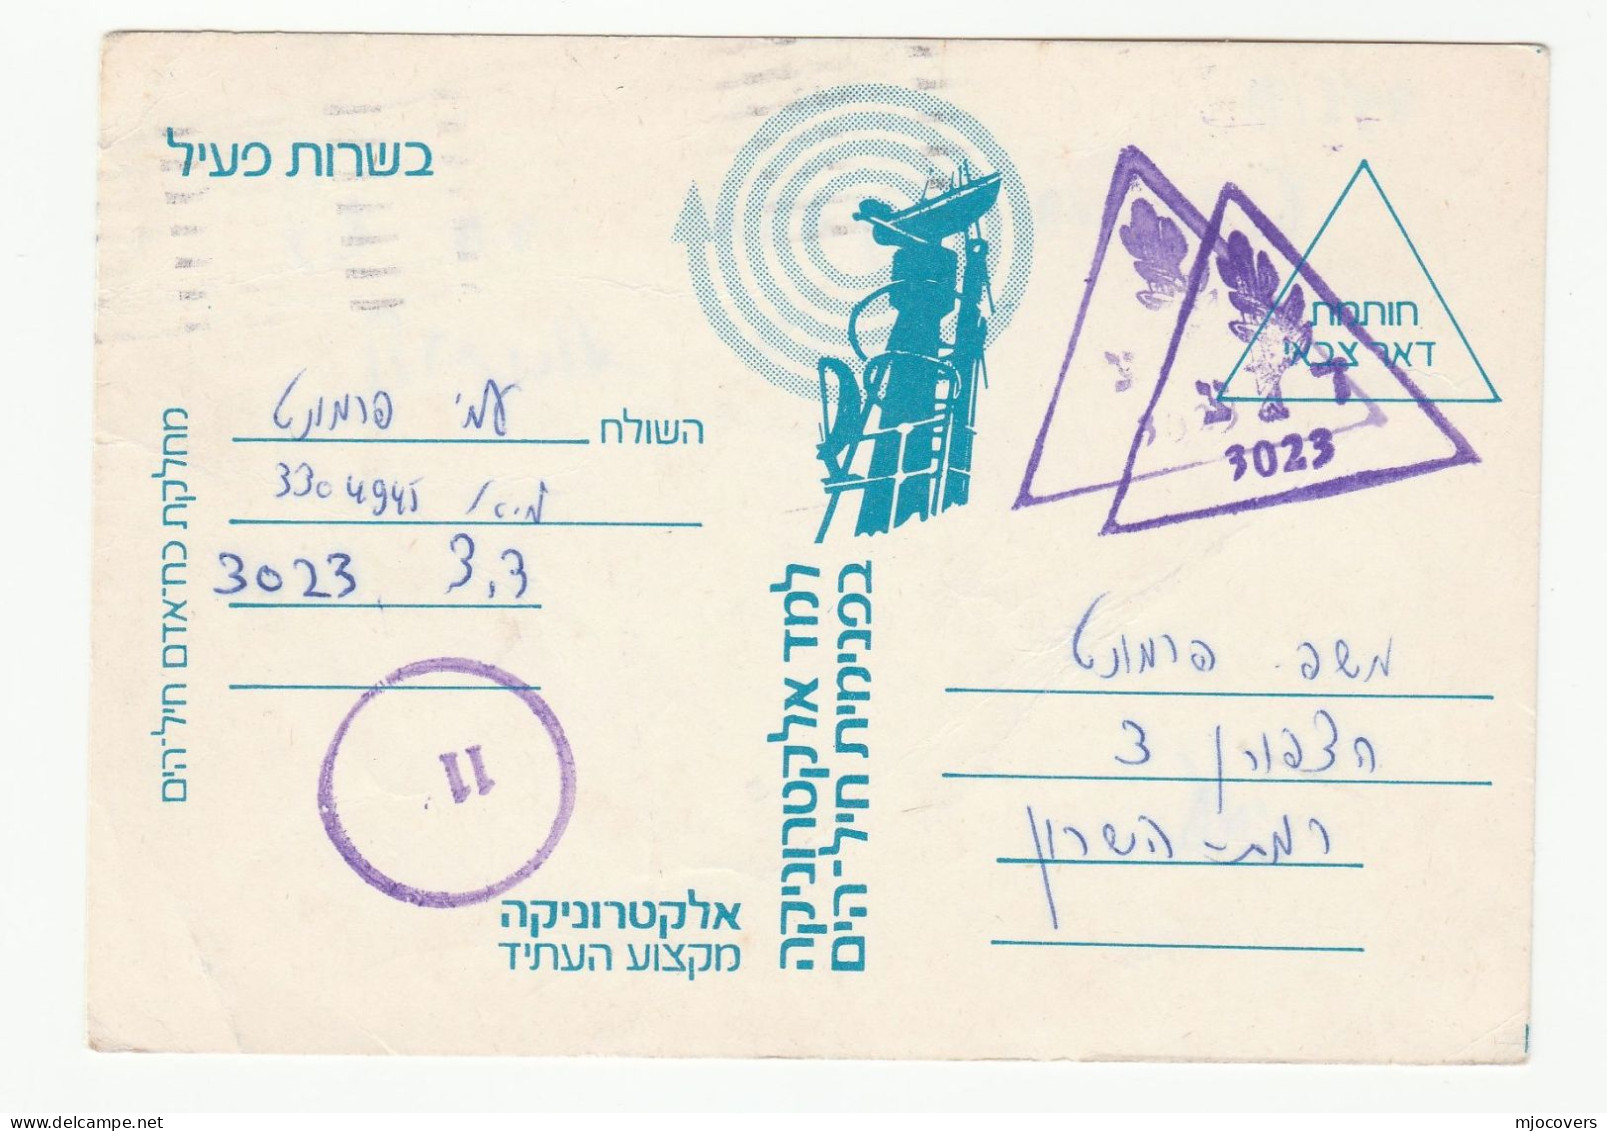 1979 Israel NAVY MILITARY SERVICE CARD  Forces Mail SHIP Cover Zahal Postcard Unit 3023 Naval Electronics School - Storia Postale